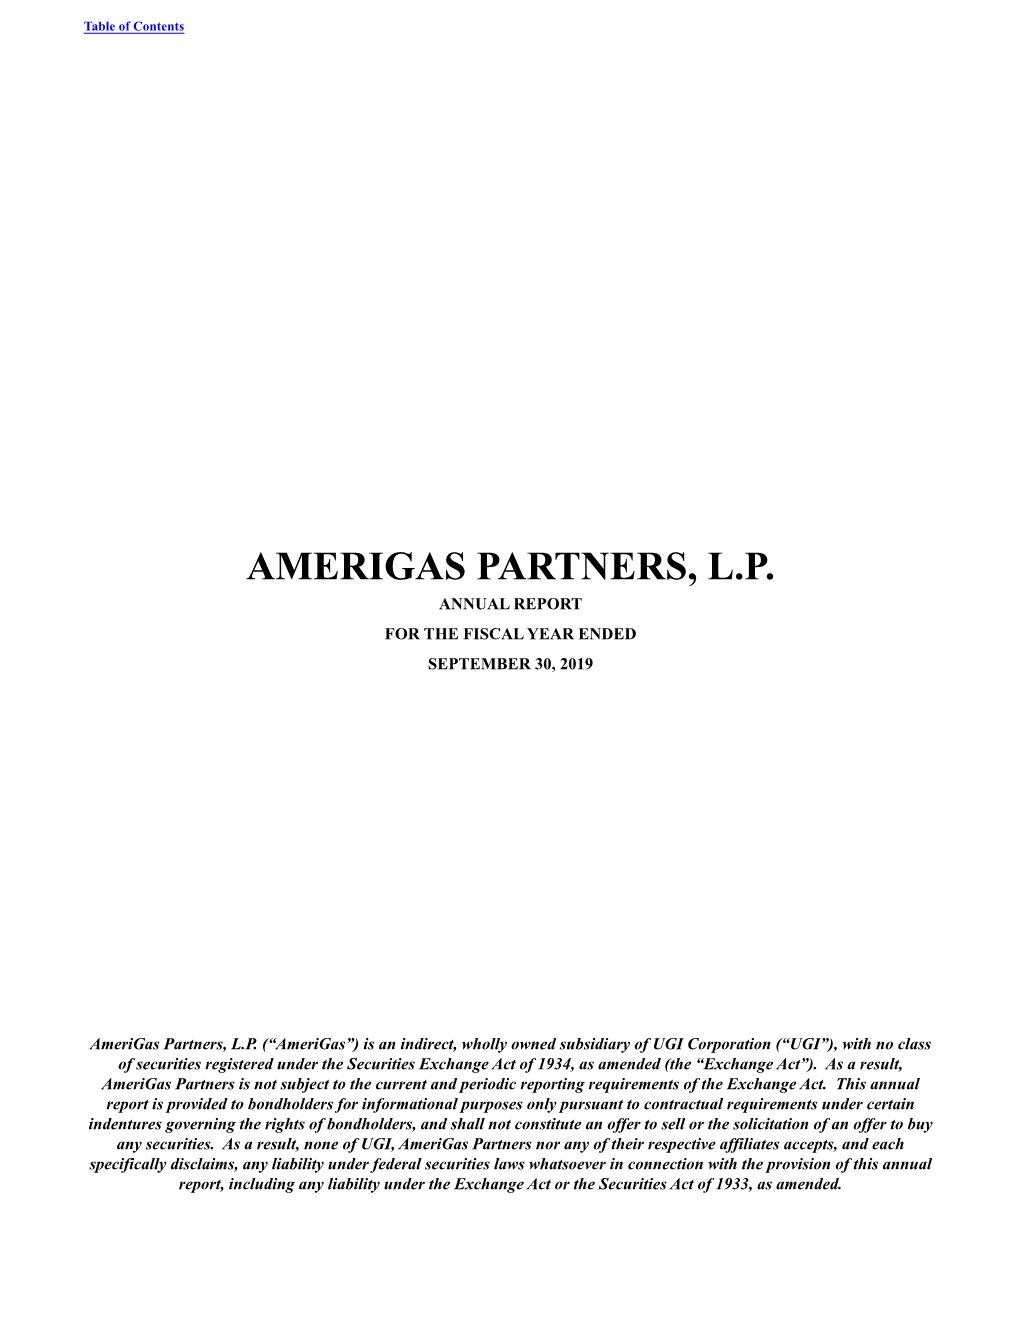 Amerigas Partners, L.P. Annual Report for the Fiscal Year Ended September 30, 2019